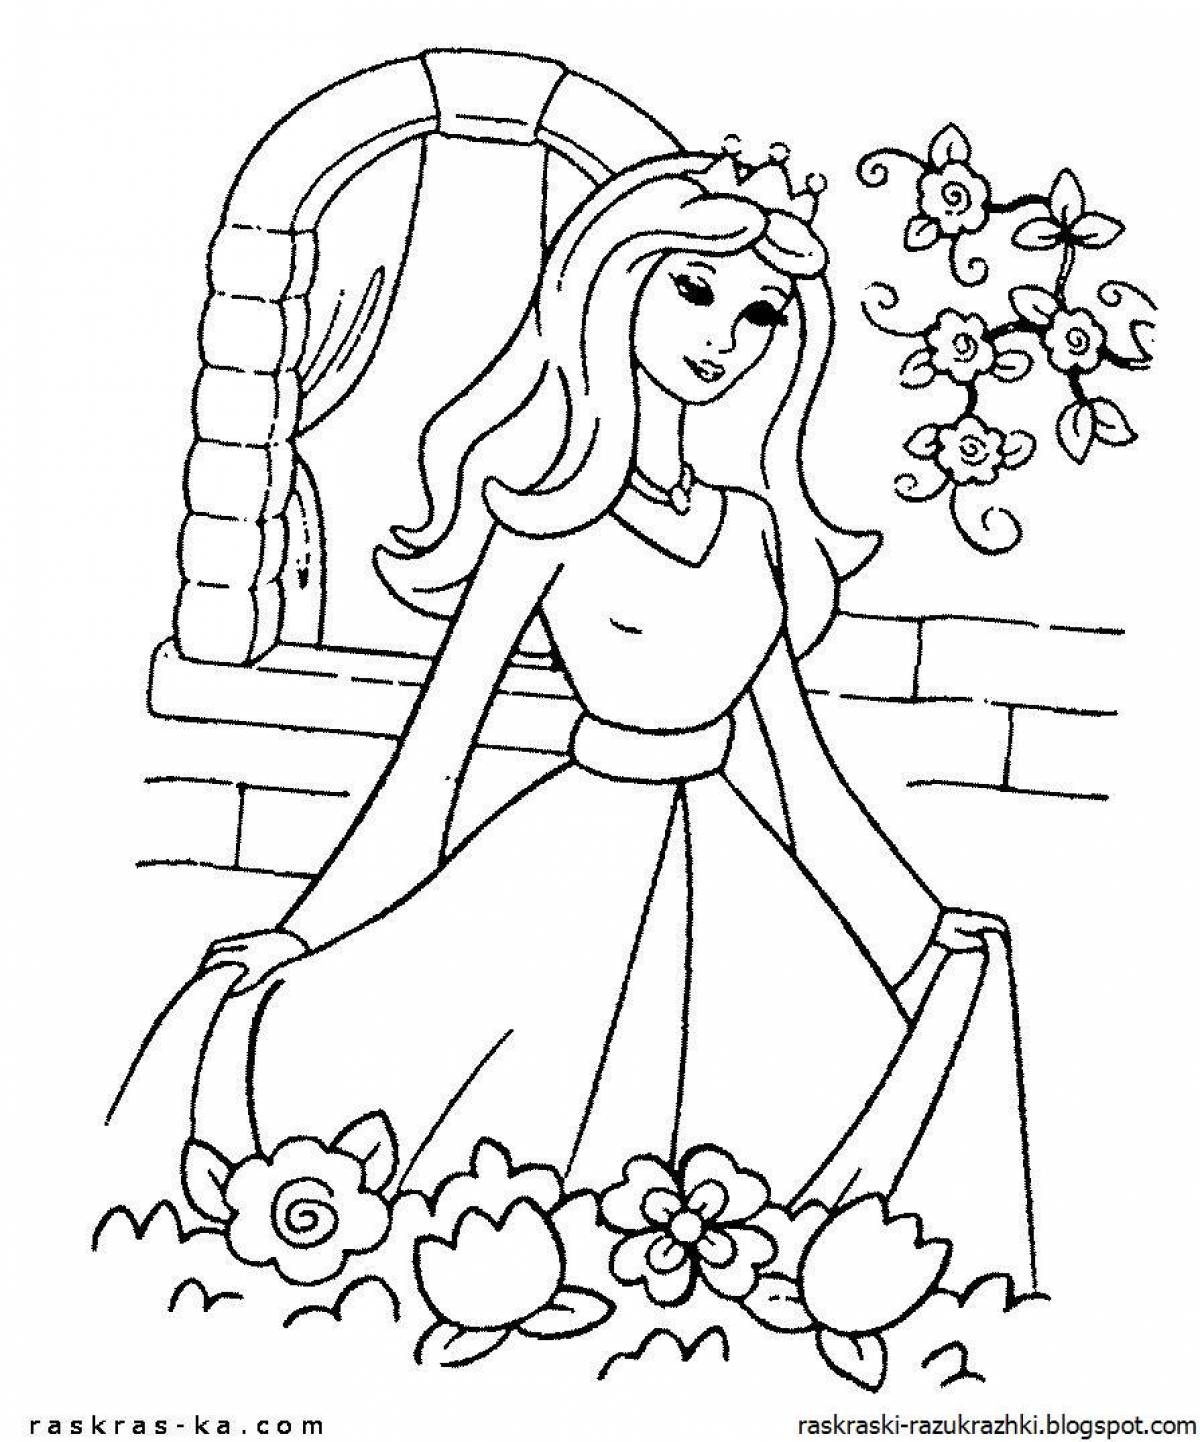 A fascinating princess coloring book for children 5-6 years old